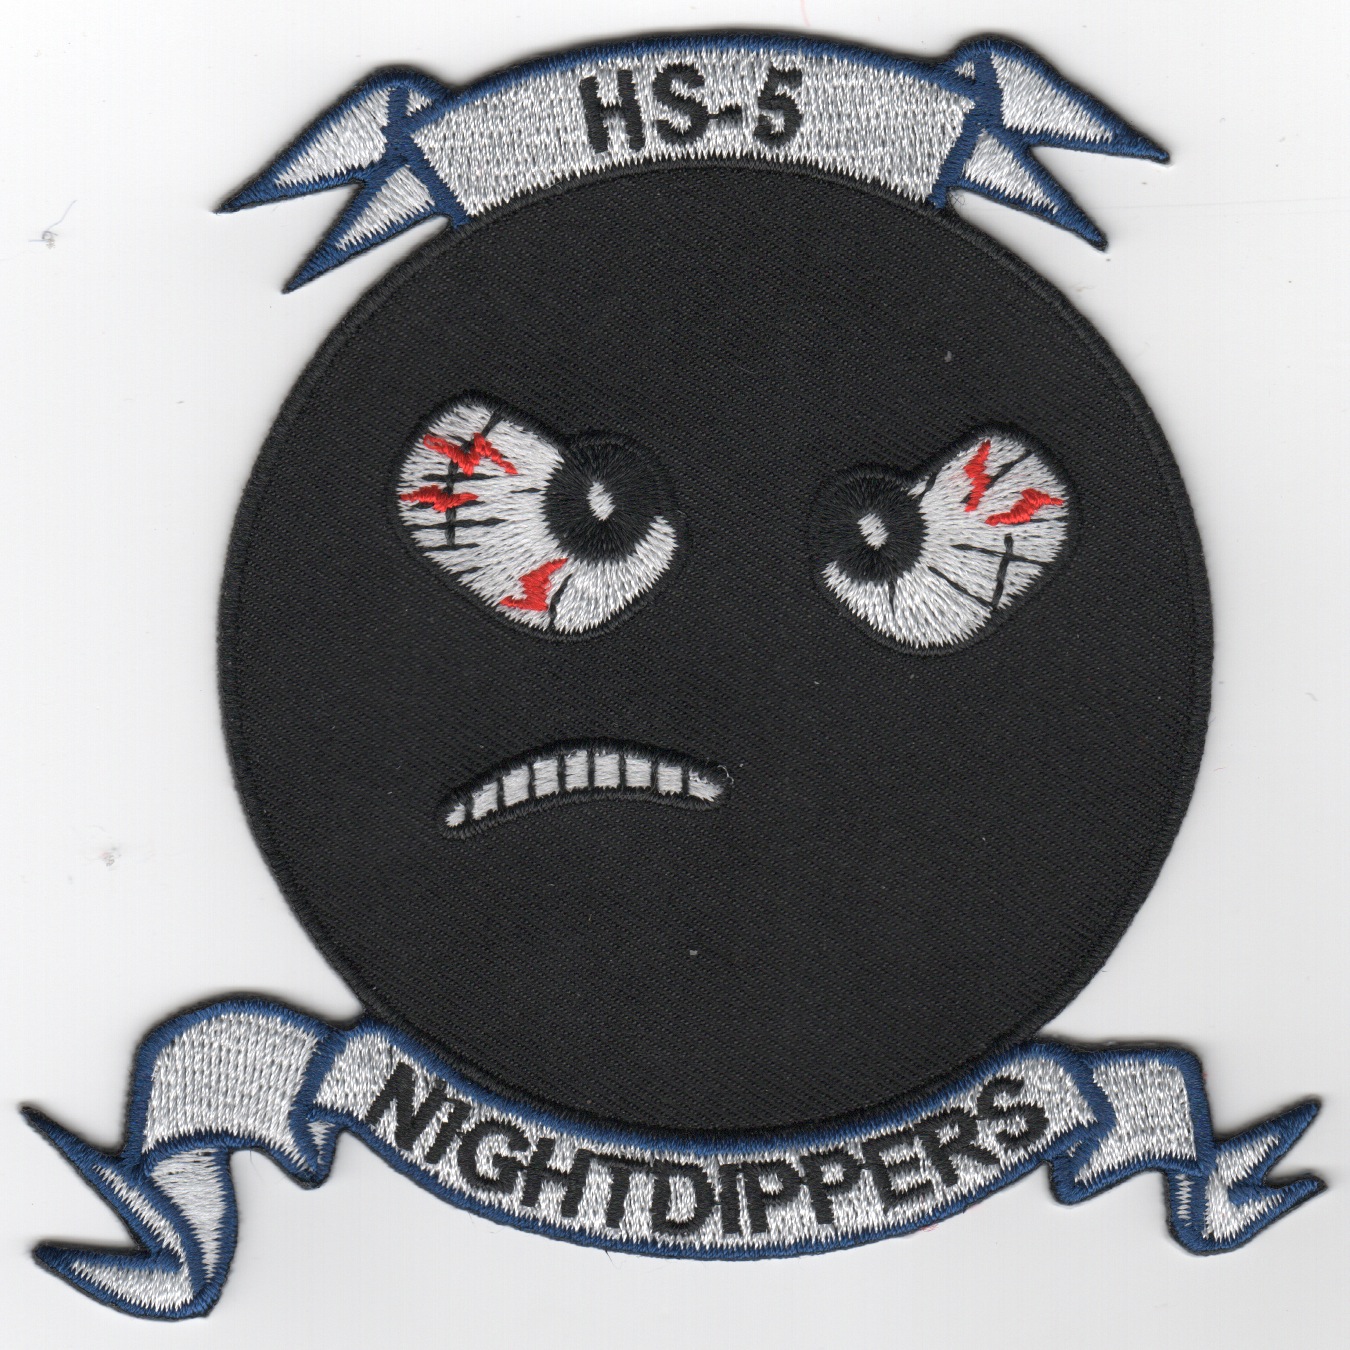 HS-5 'Angry Grimace' Patch